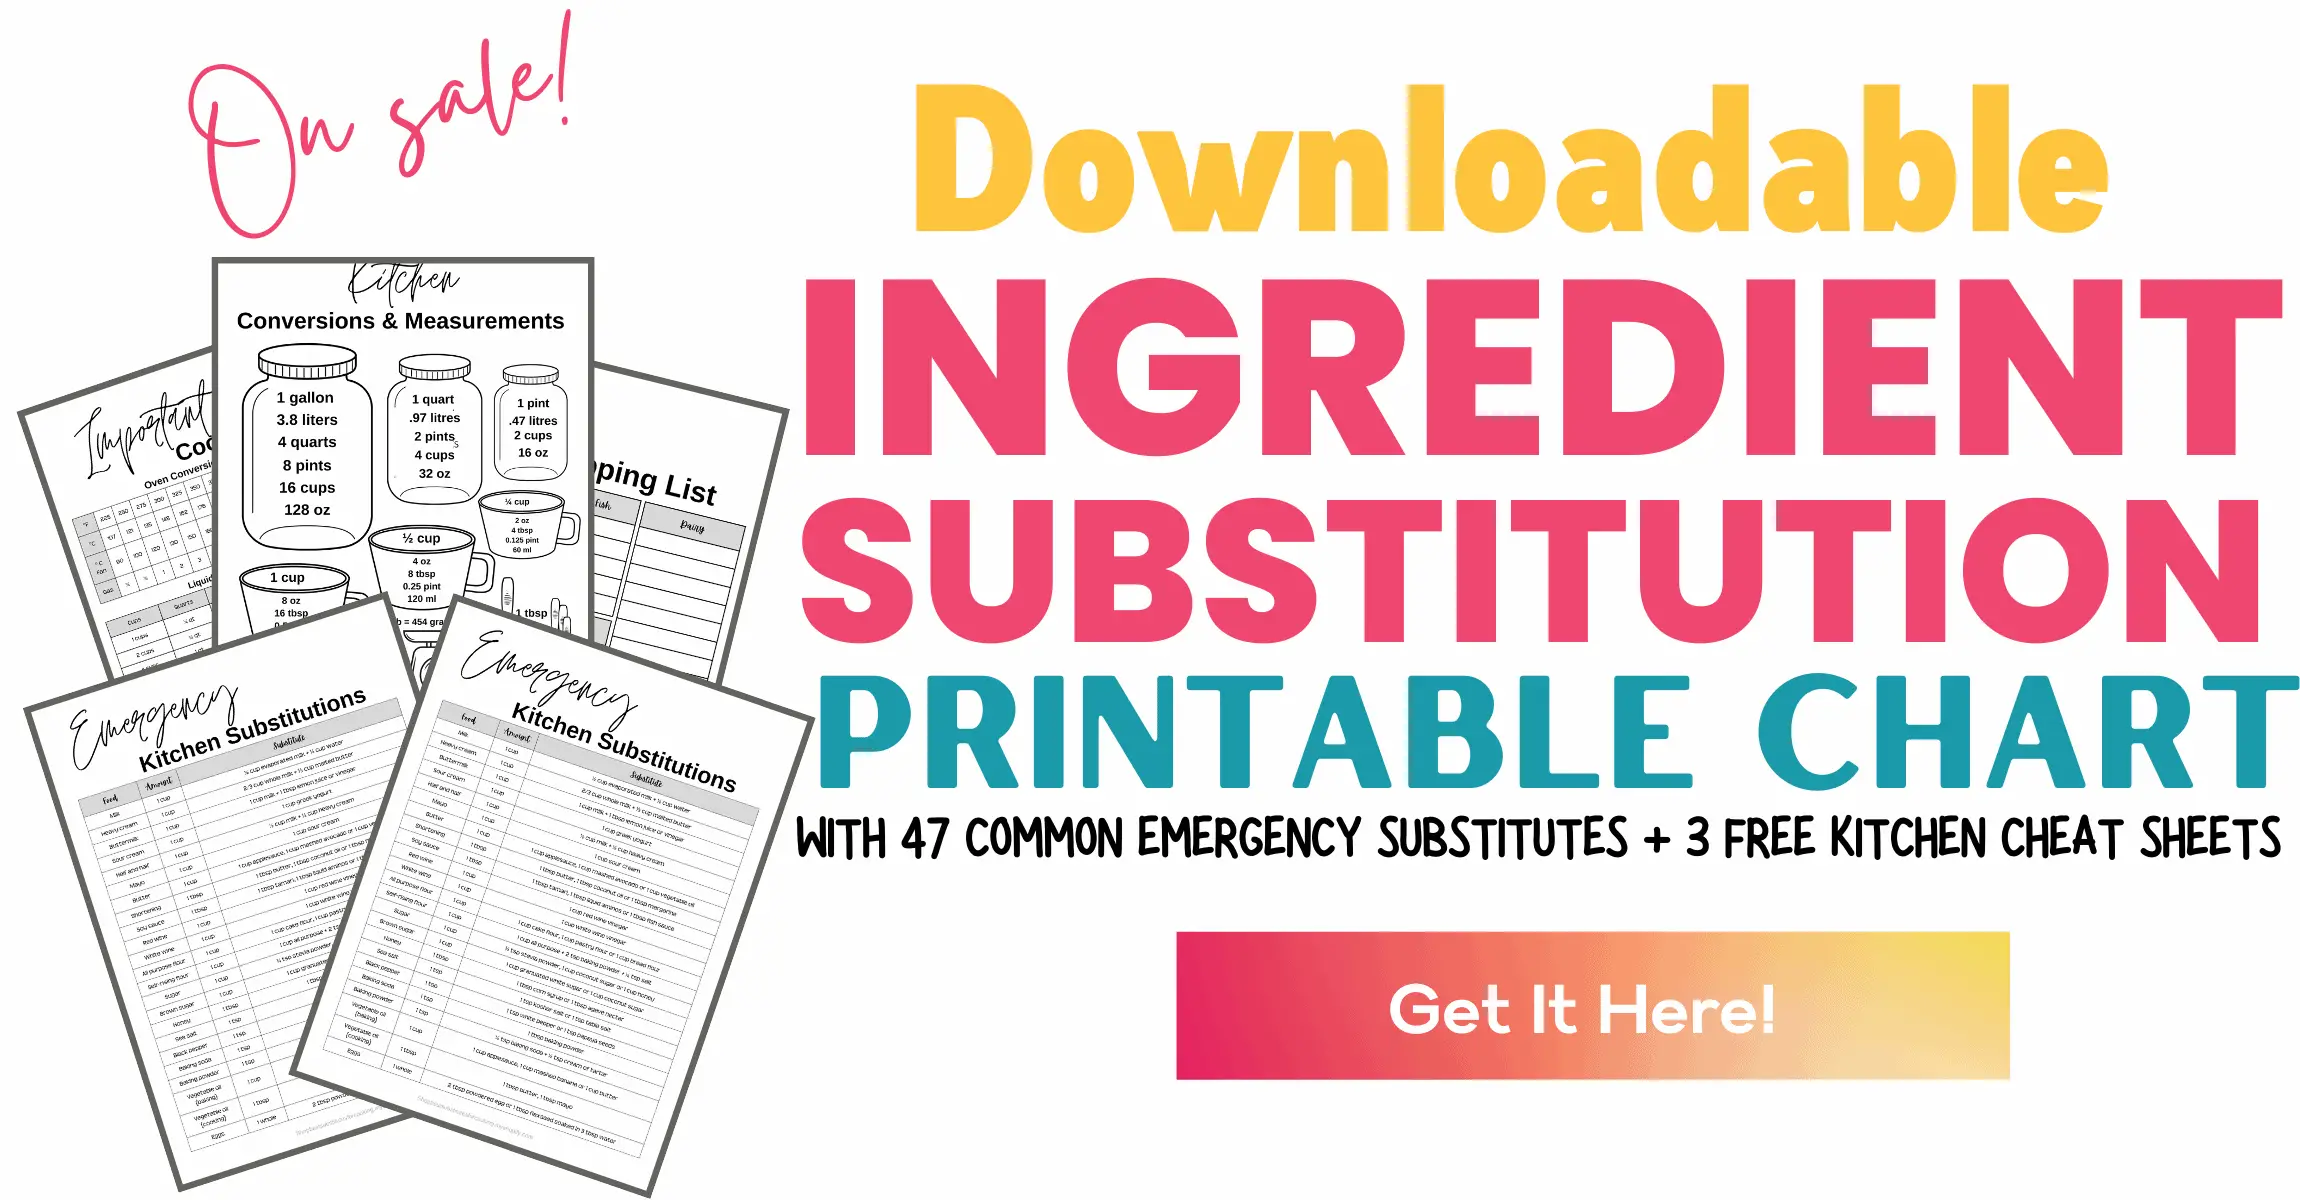 Ingredient substitute printable chart banner